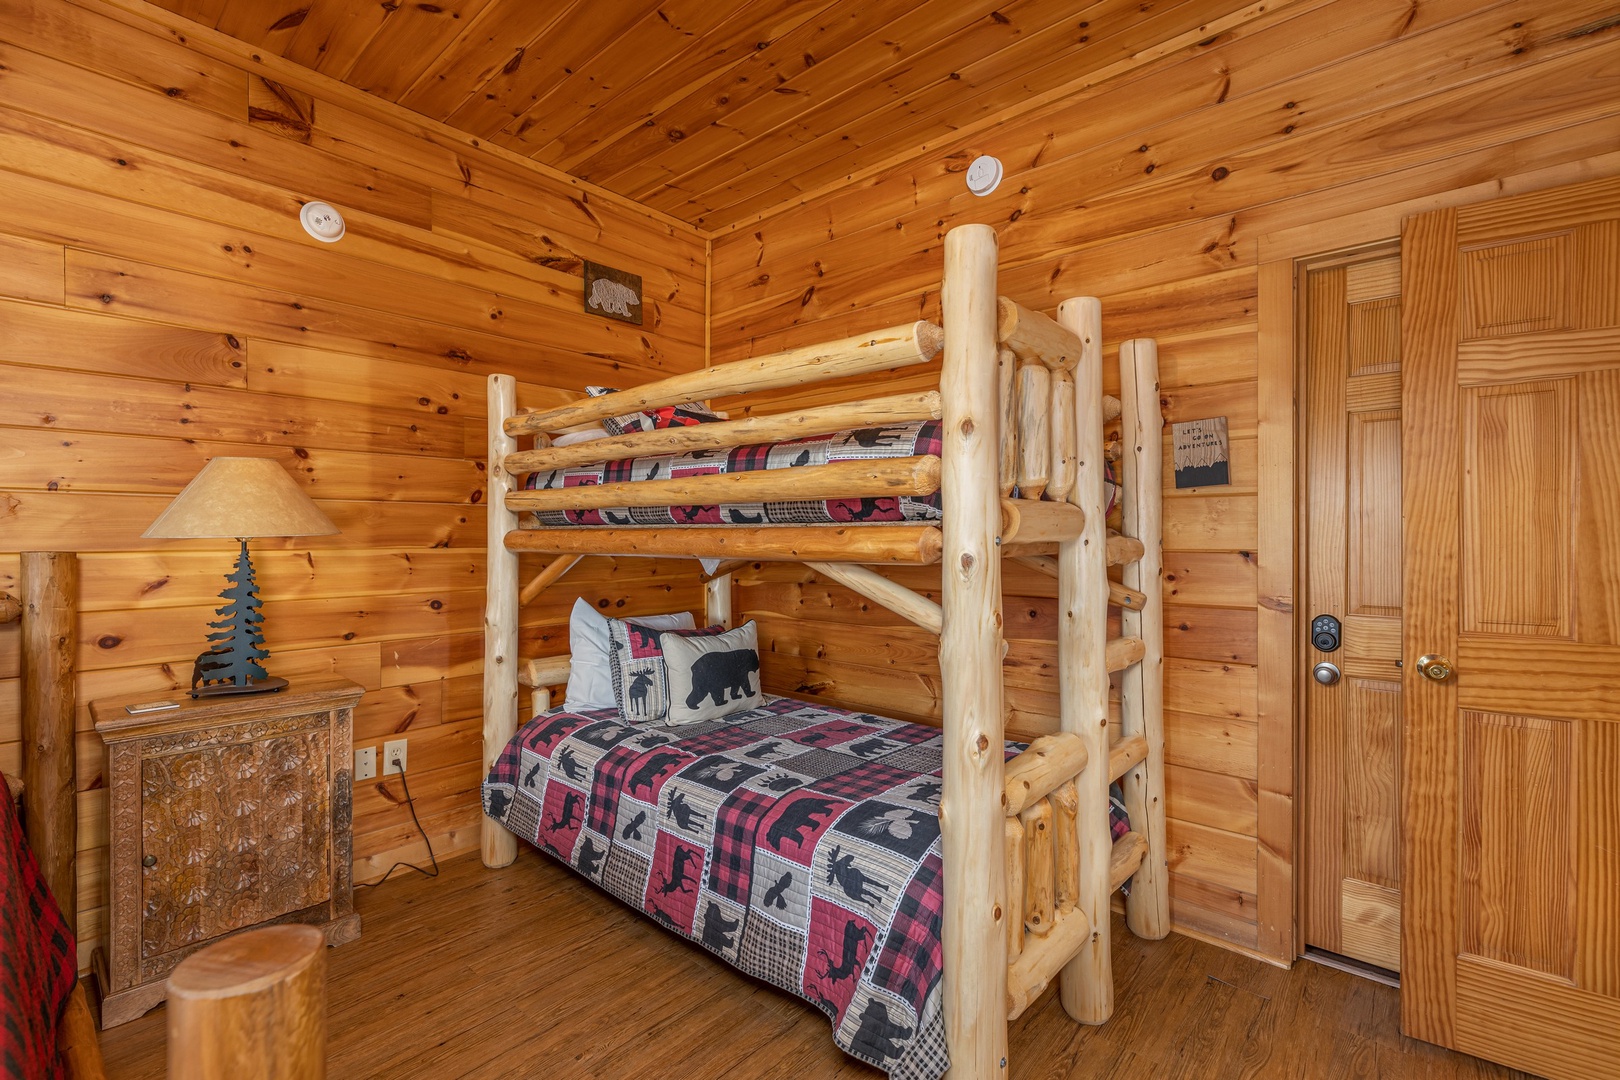 Log Bunk Beds at Mountain Mama, a 3 bedroom cabin rental located in pigeon forge